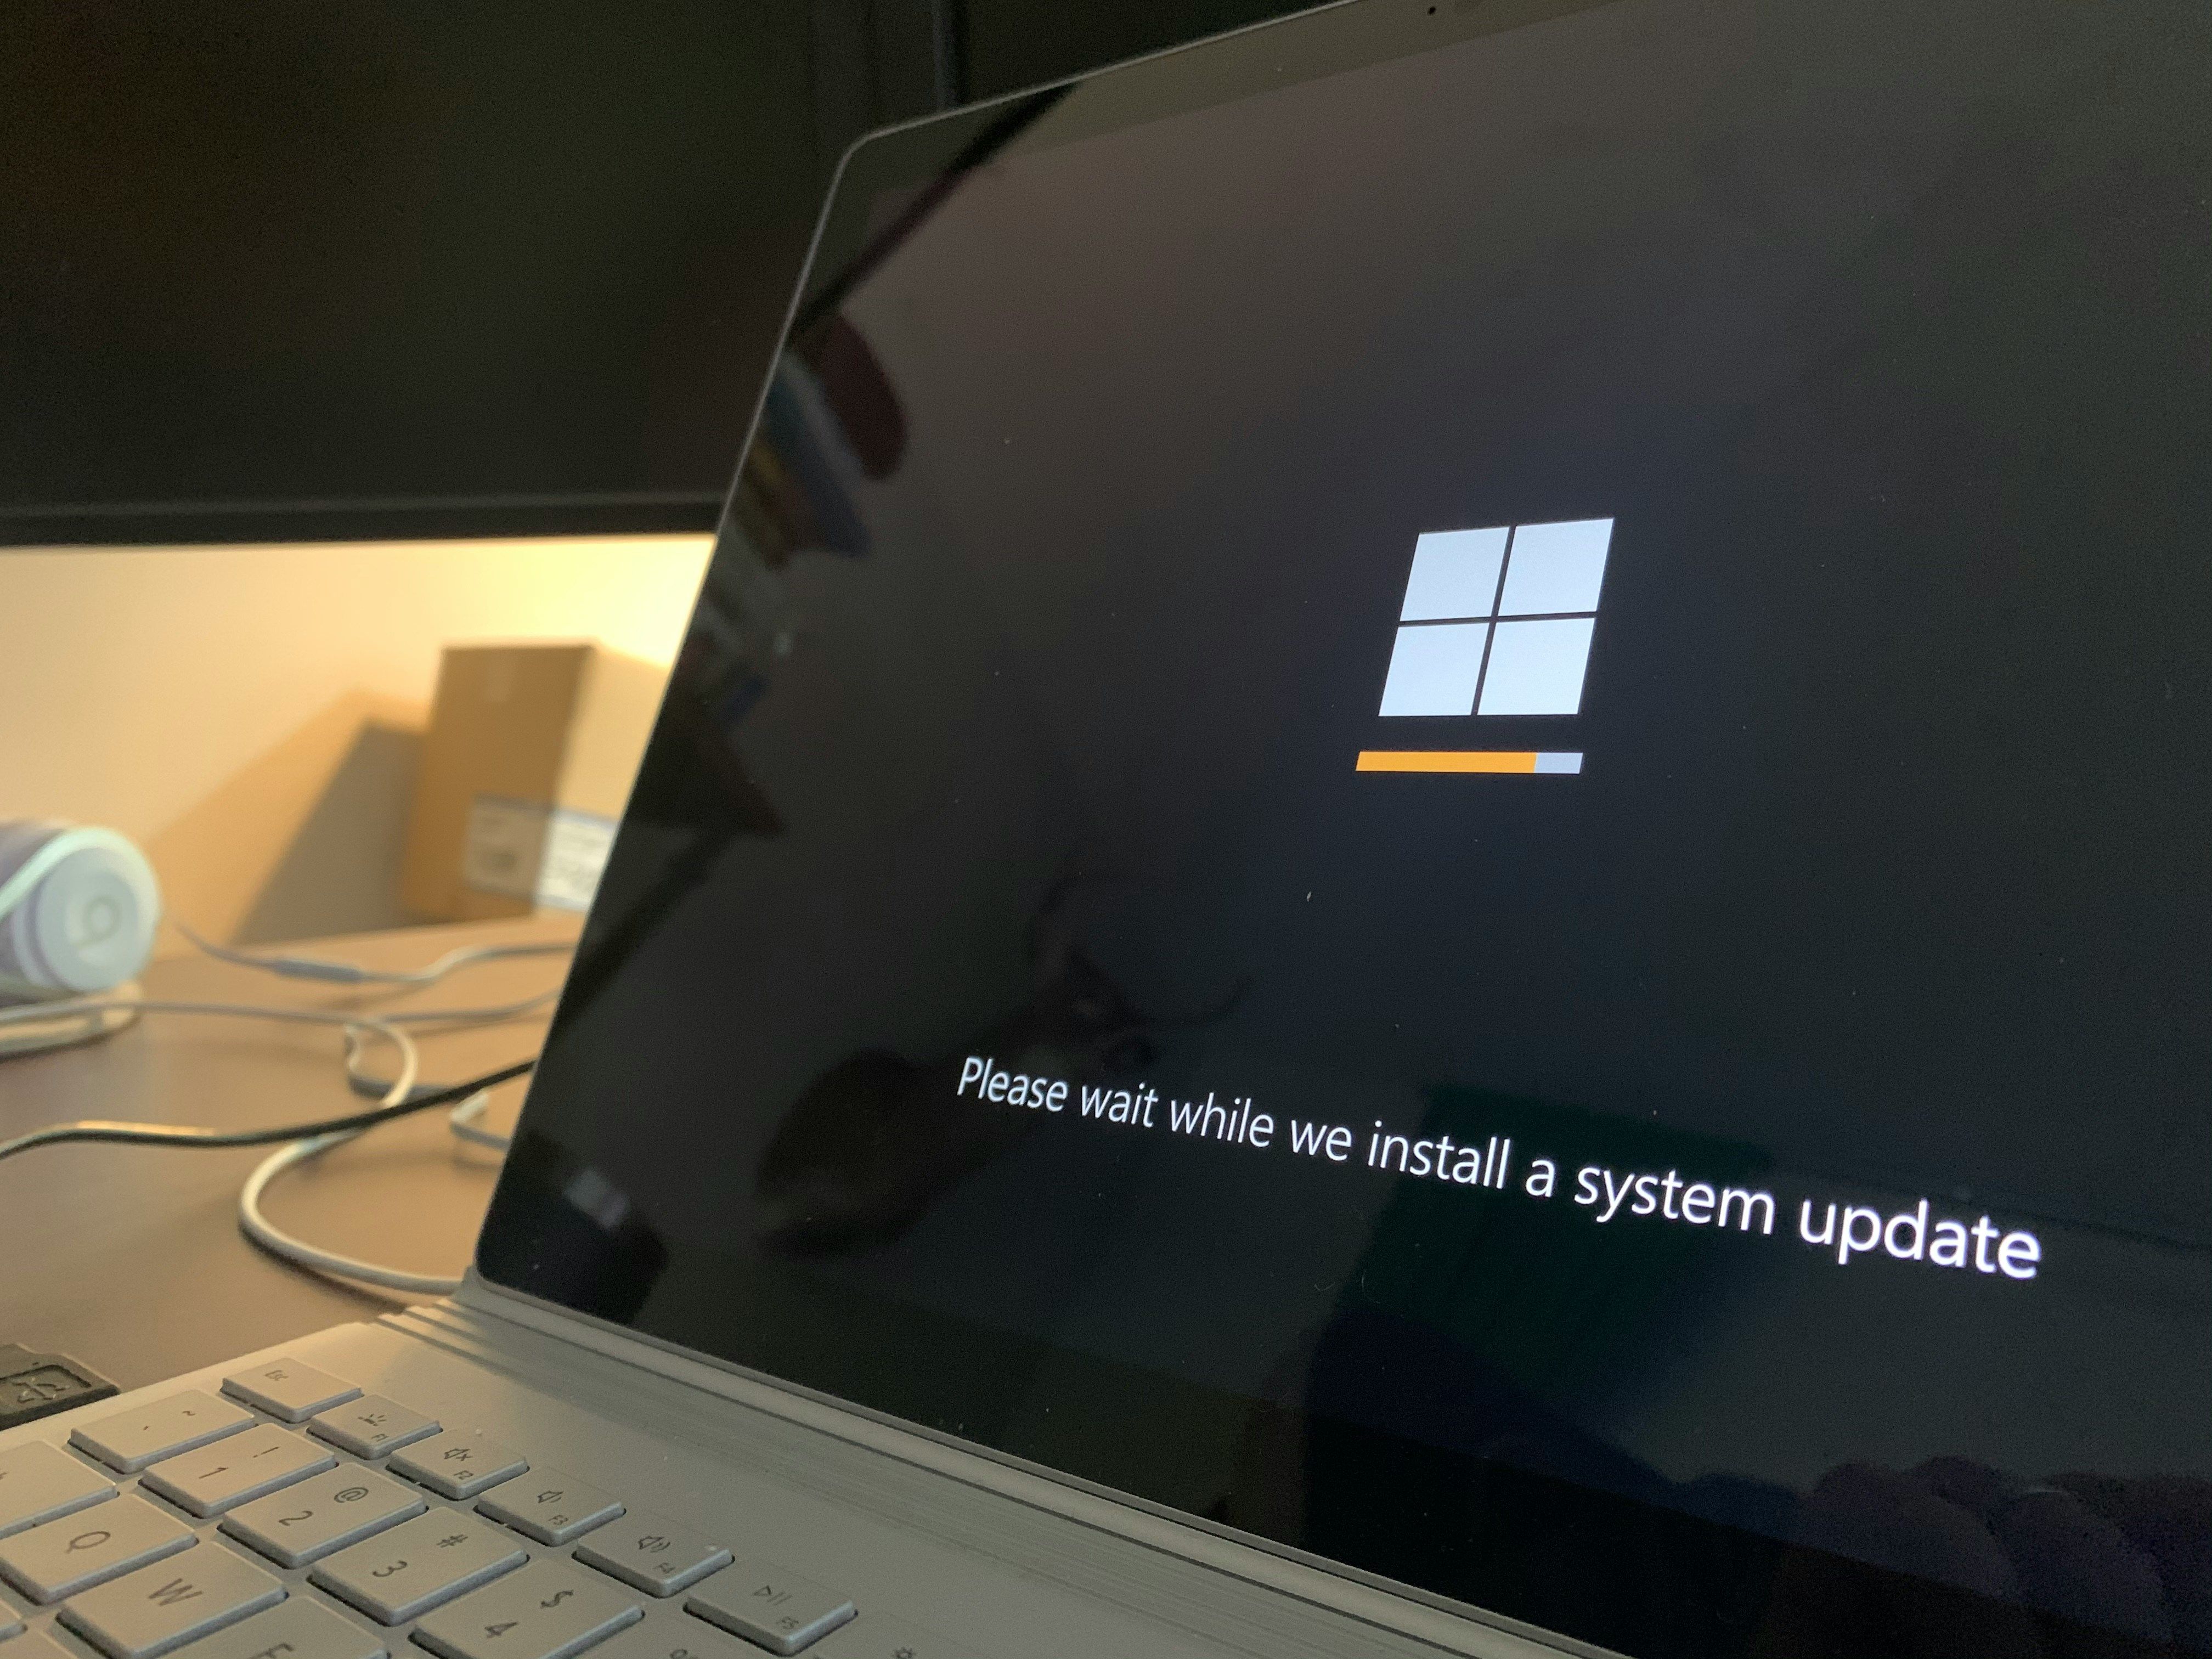 Windows installing a system update